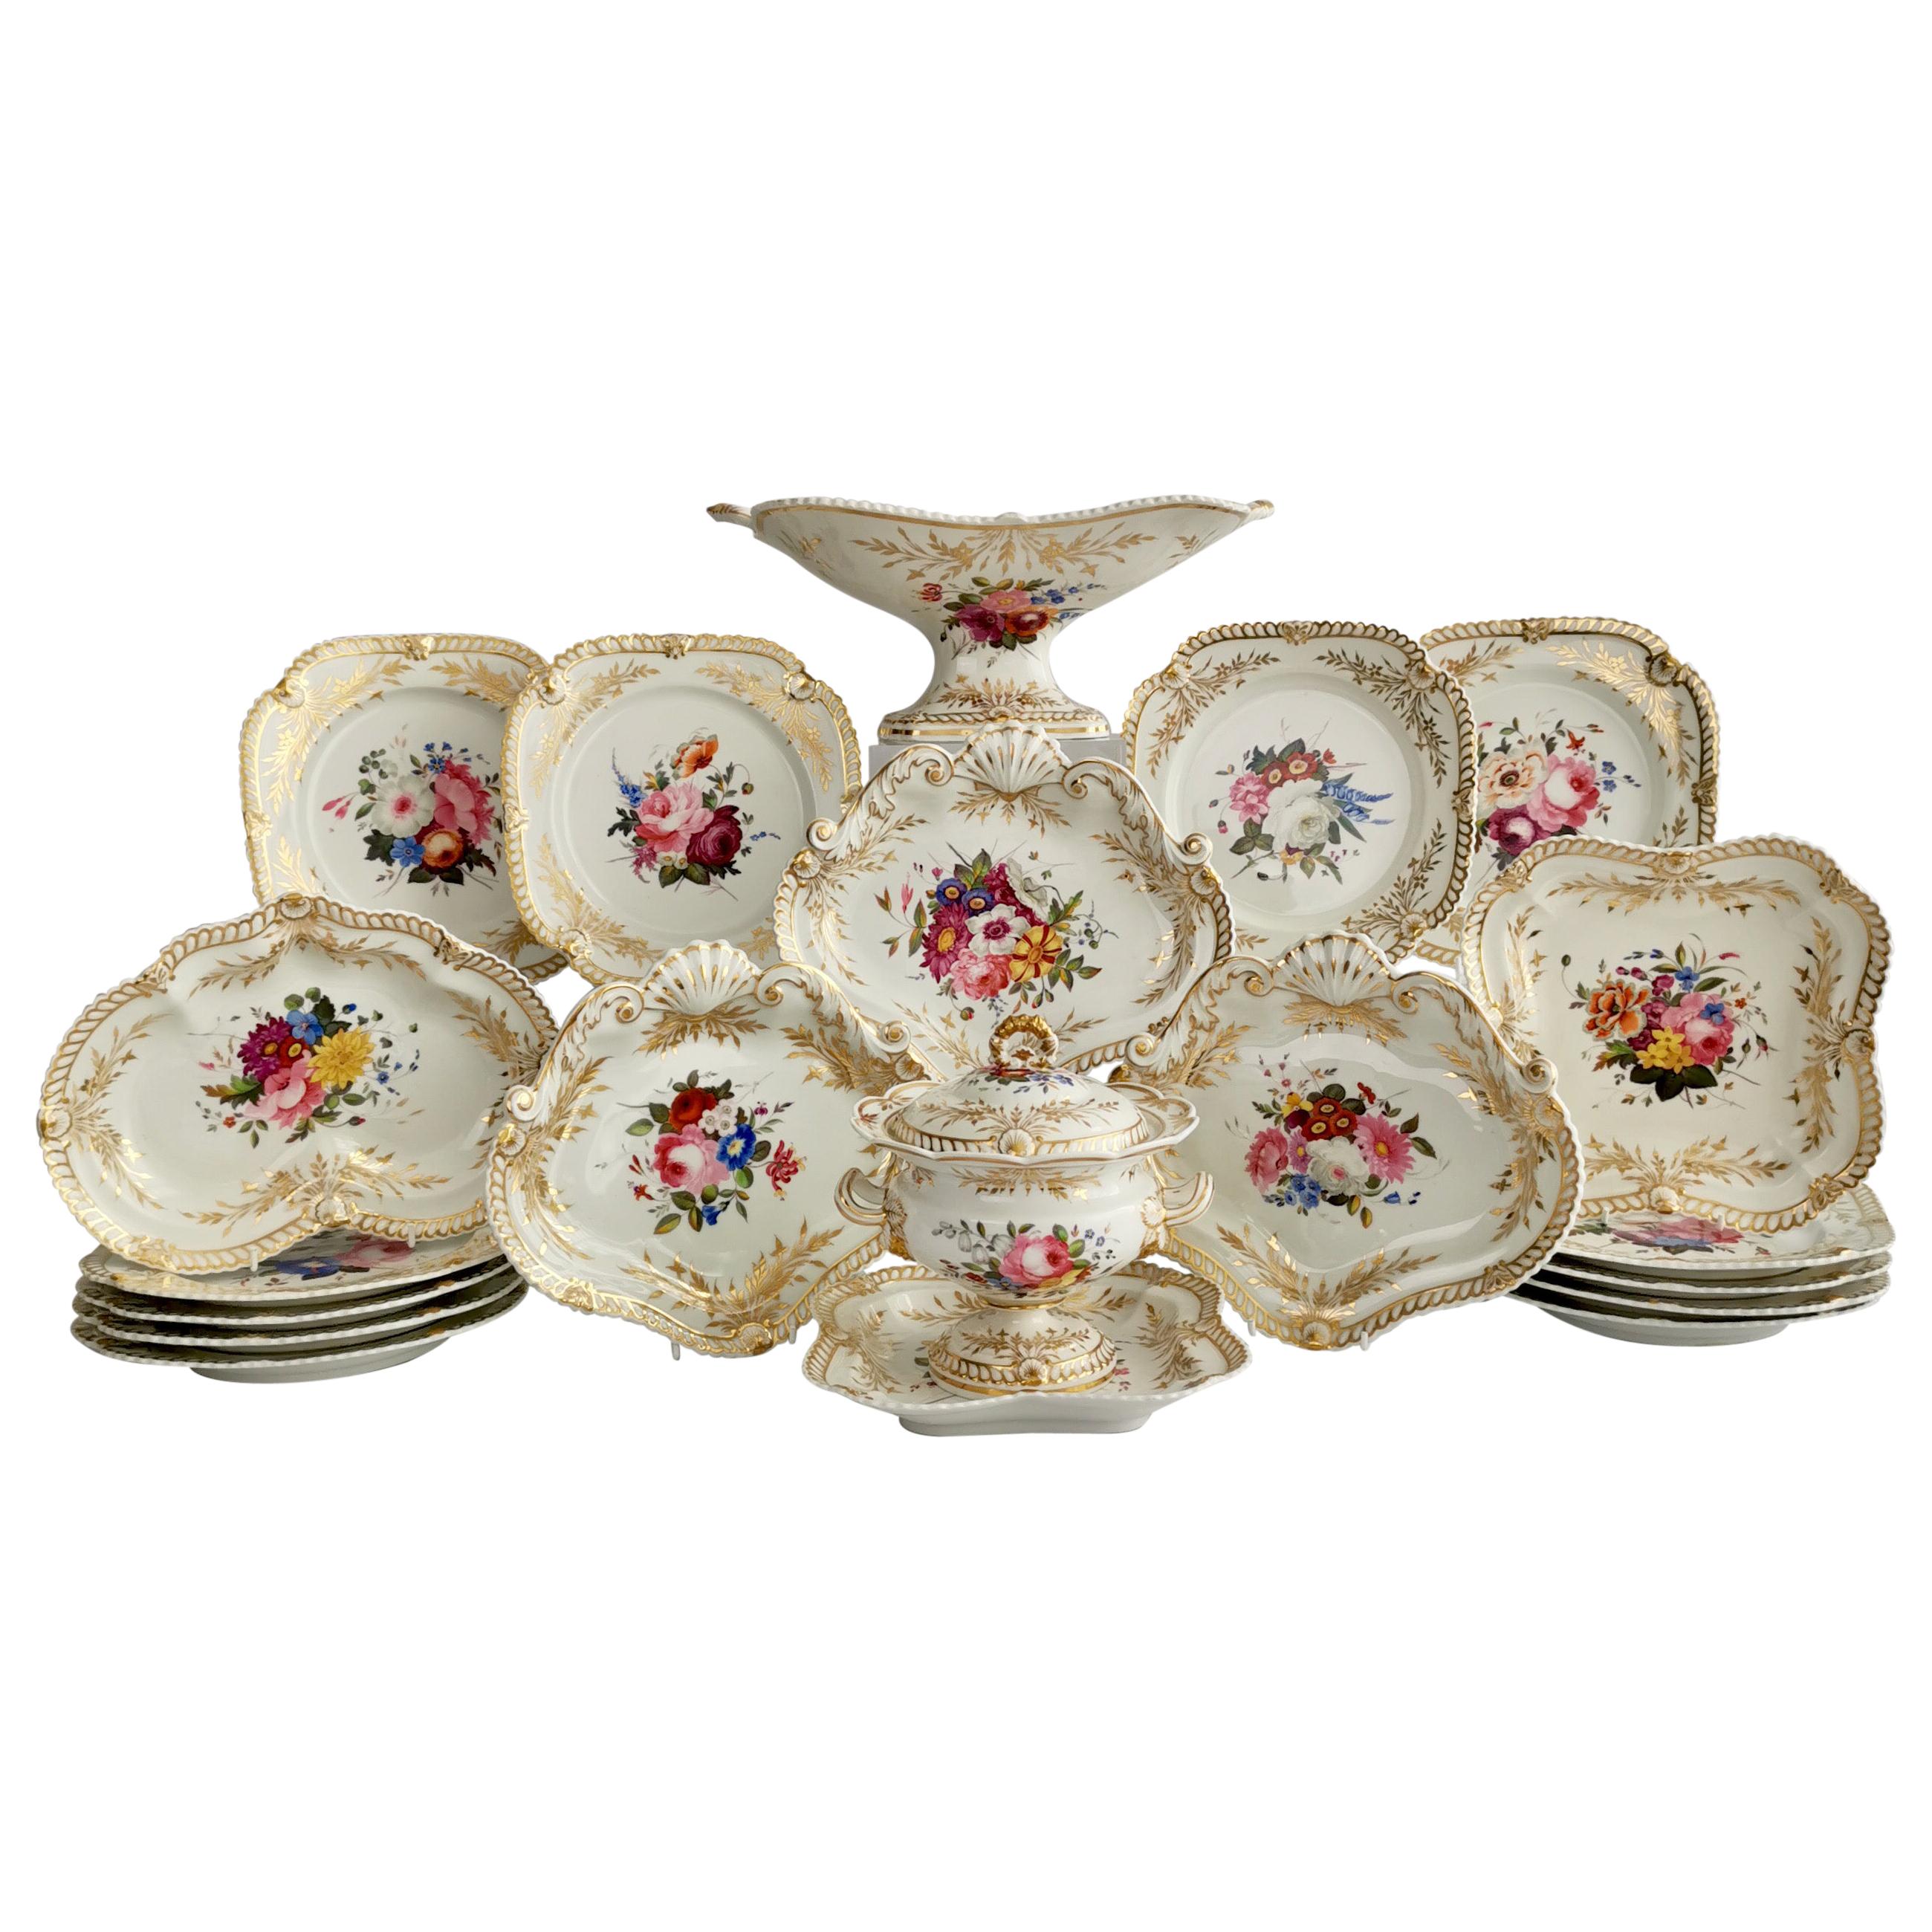 Chamberlains Worcester Dessert Service, White with Flowers, Regency, ca 1822